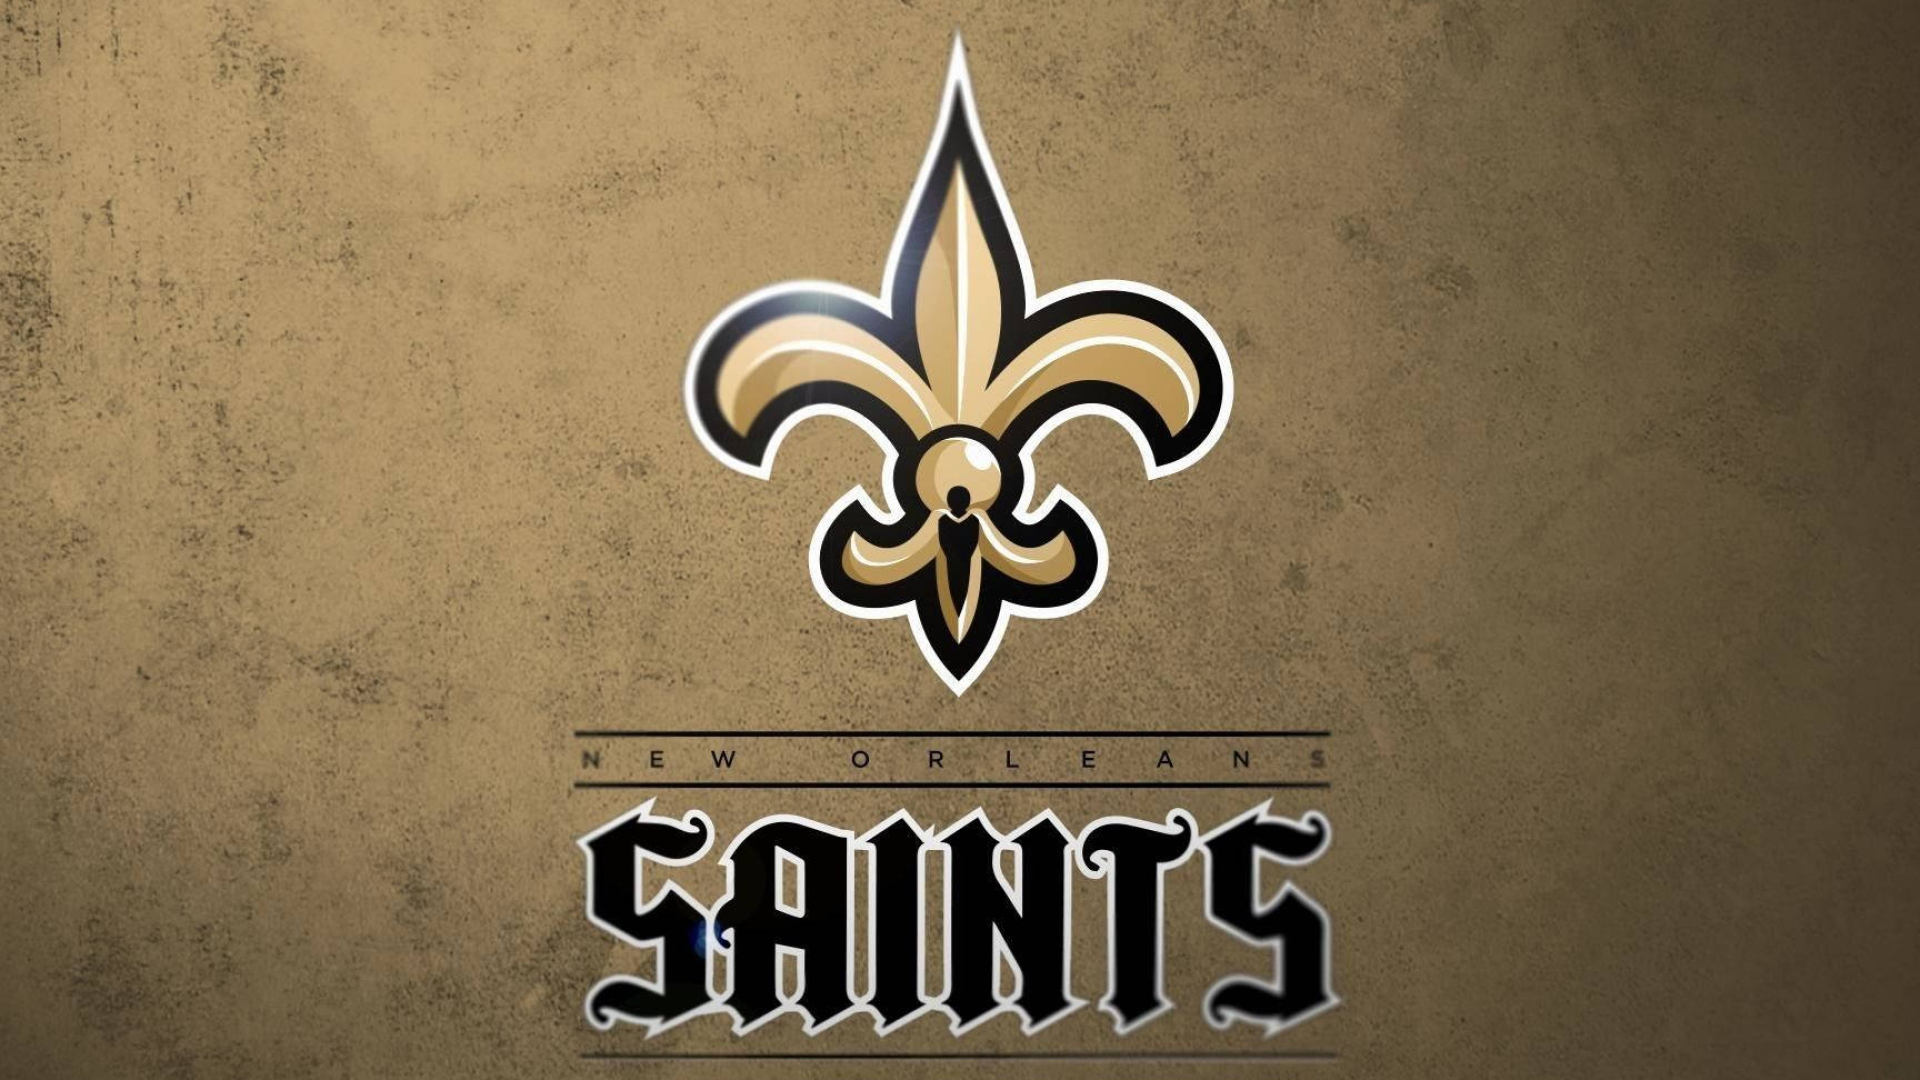 1920x1080 Download Staggering New Orleans Saints Poster Wallpaper